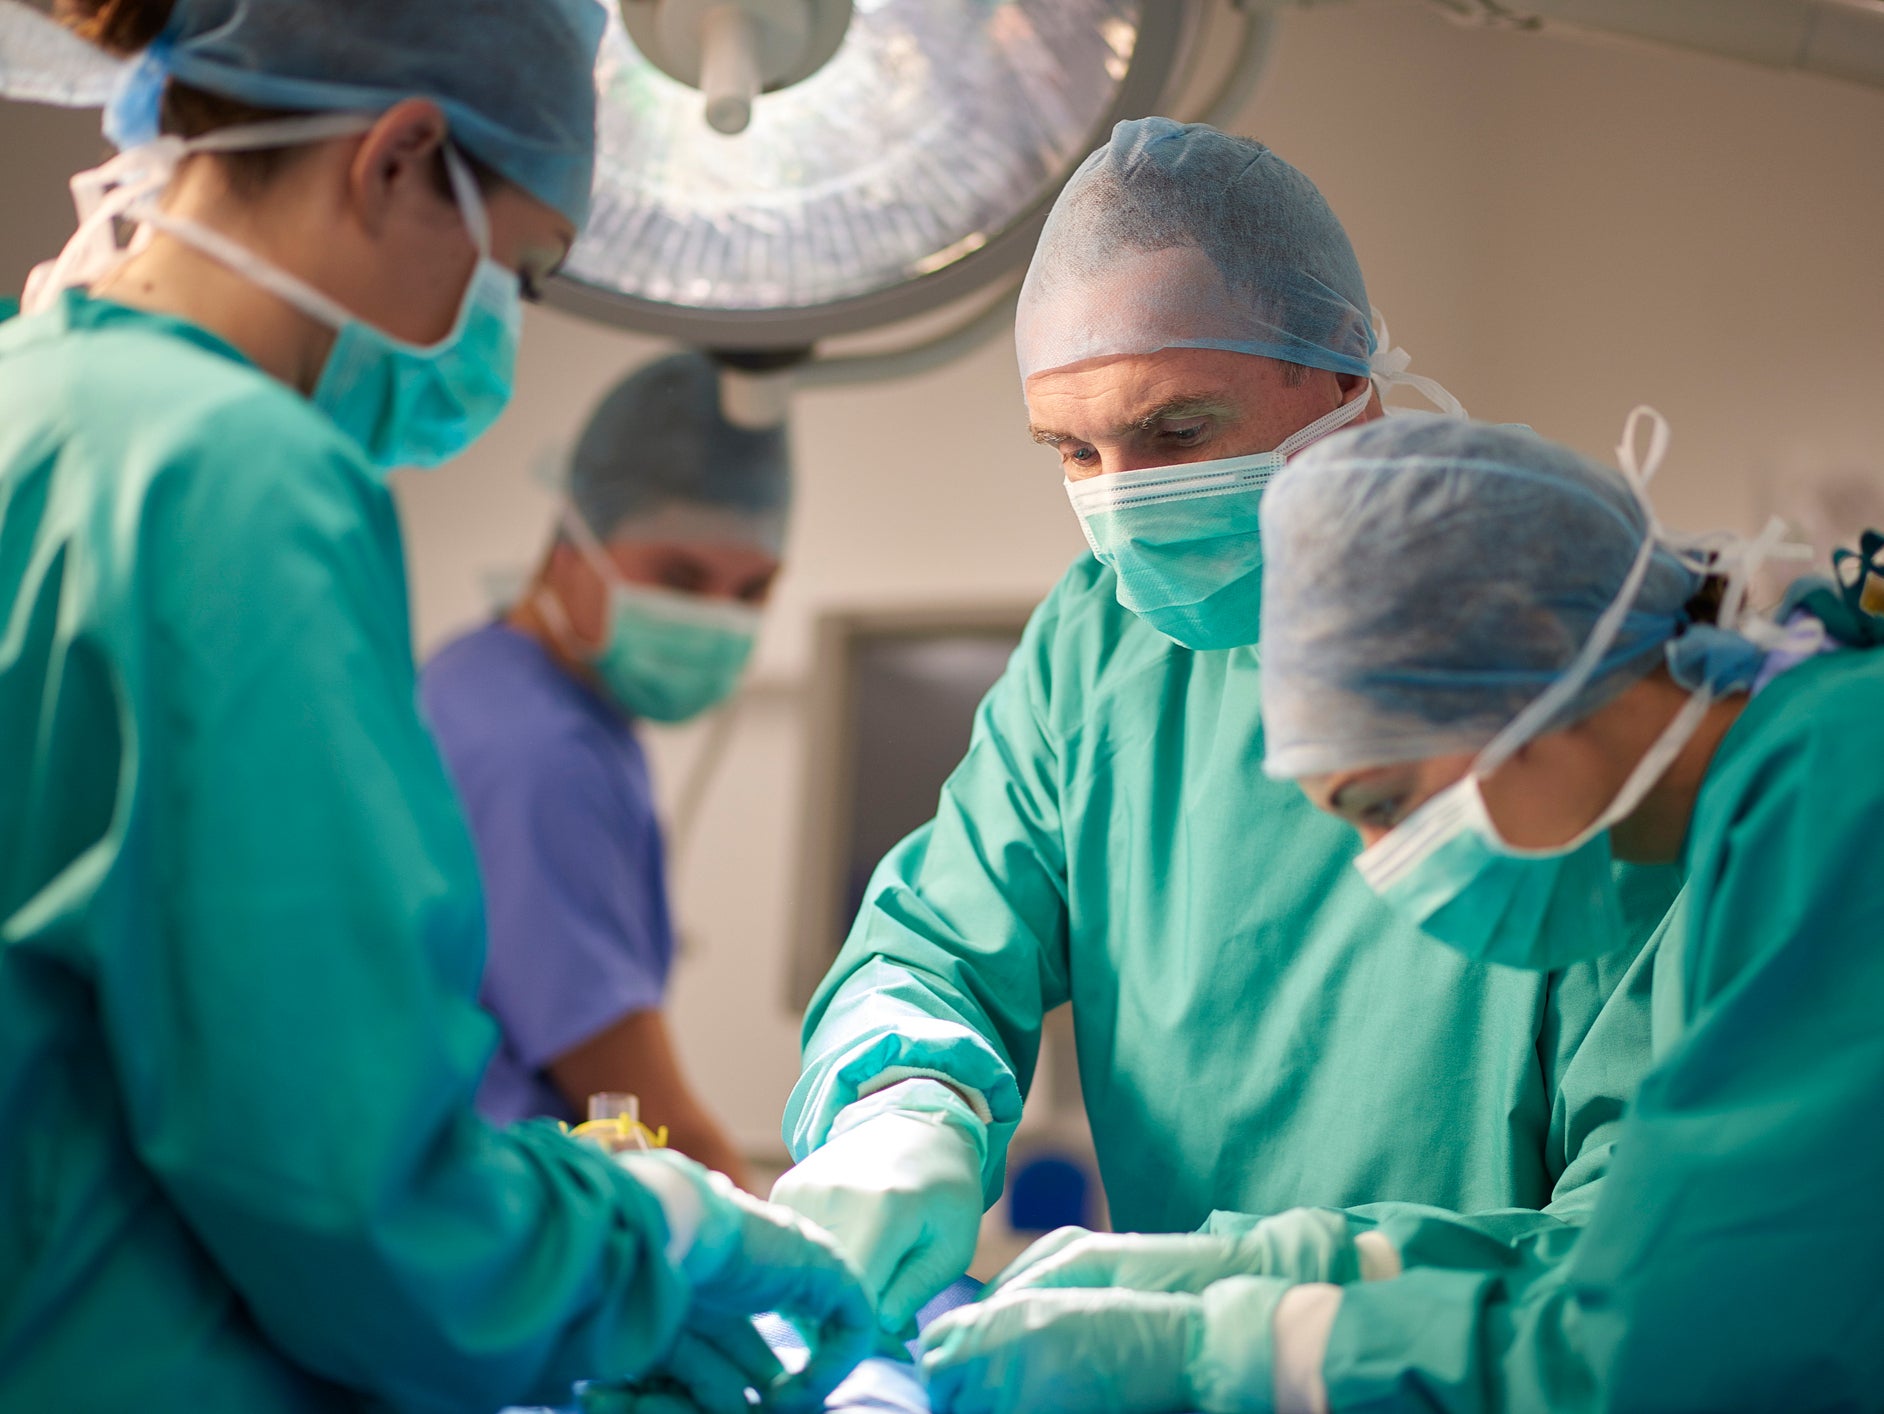 Surgeons reported abuse, racism and homophobia in NHS operating theatres